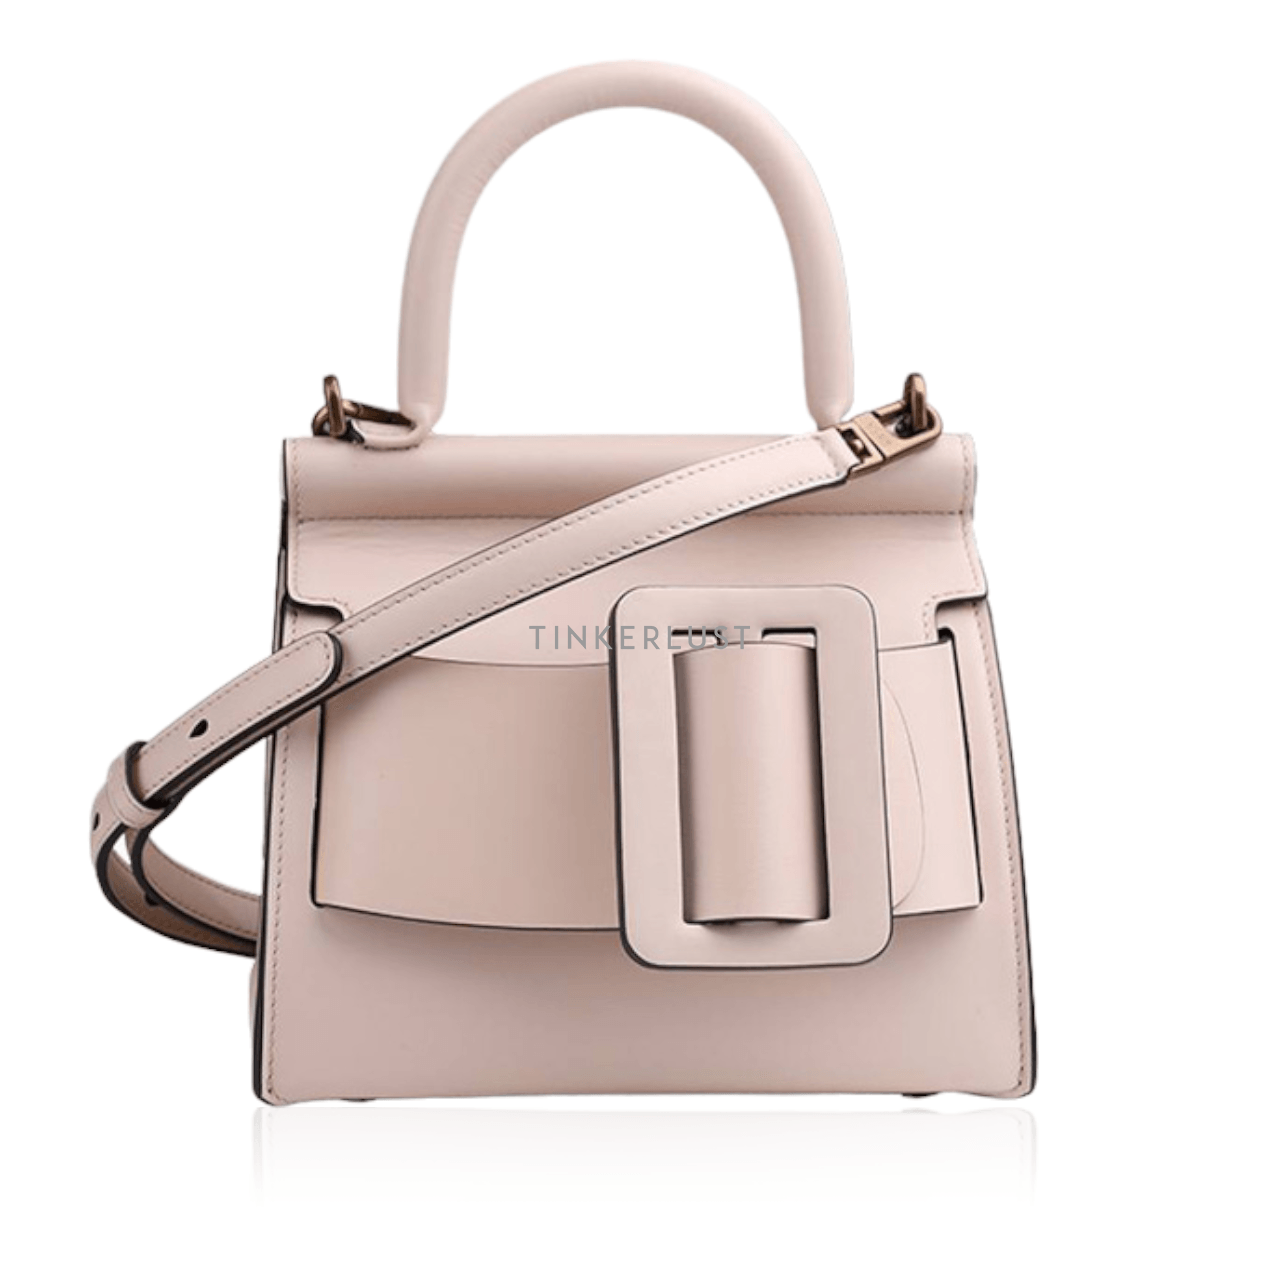 BOYY Karl 19 Top Handle Bag in Rose Smooth Leather with Oversized Buckle Satchel